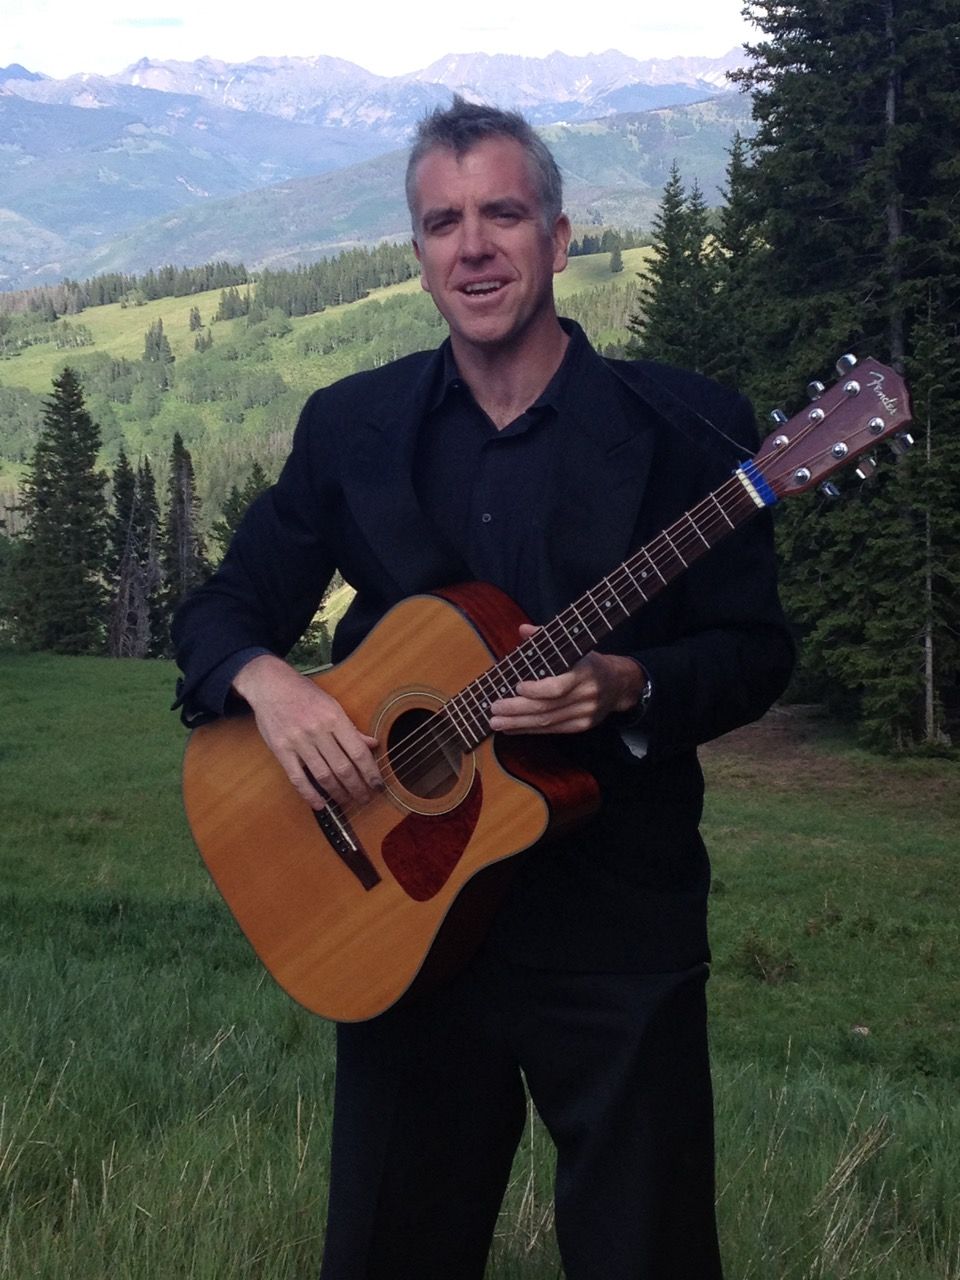 Jonny Mogambo standing with guitar in front of mountain